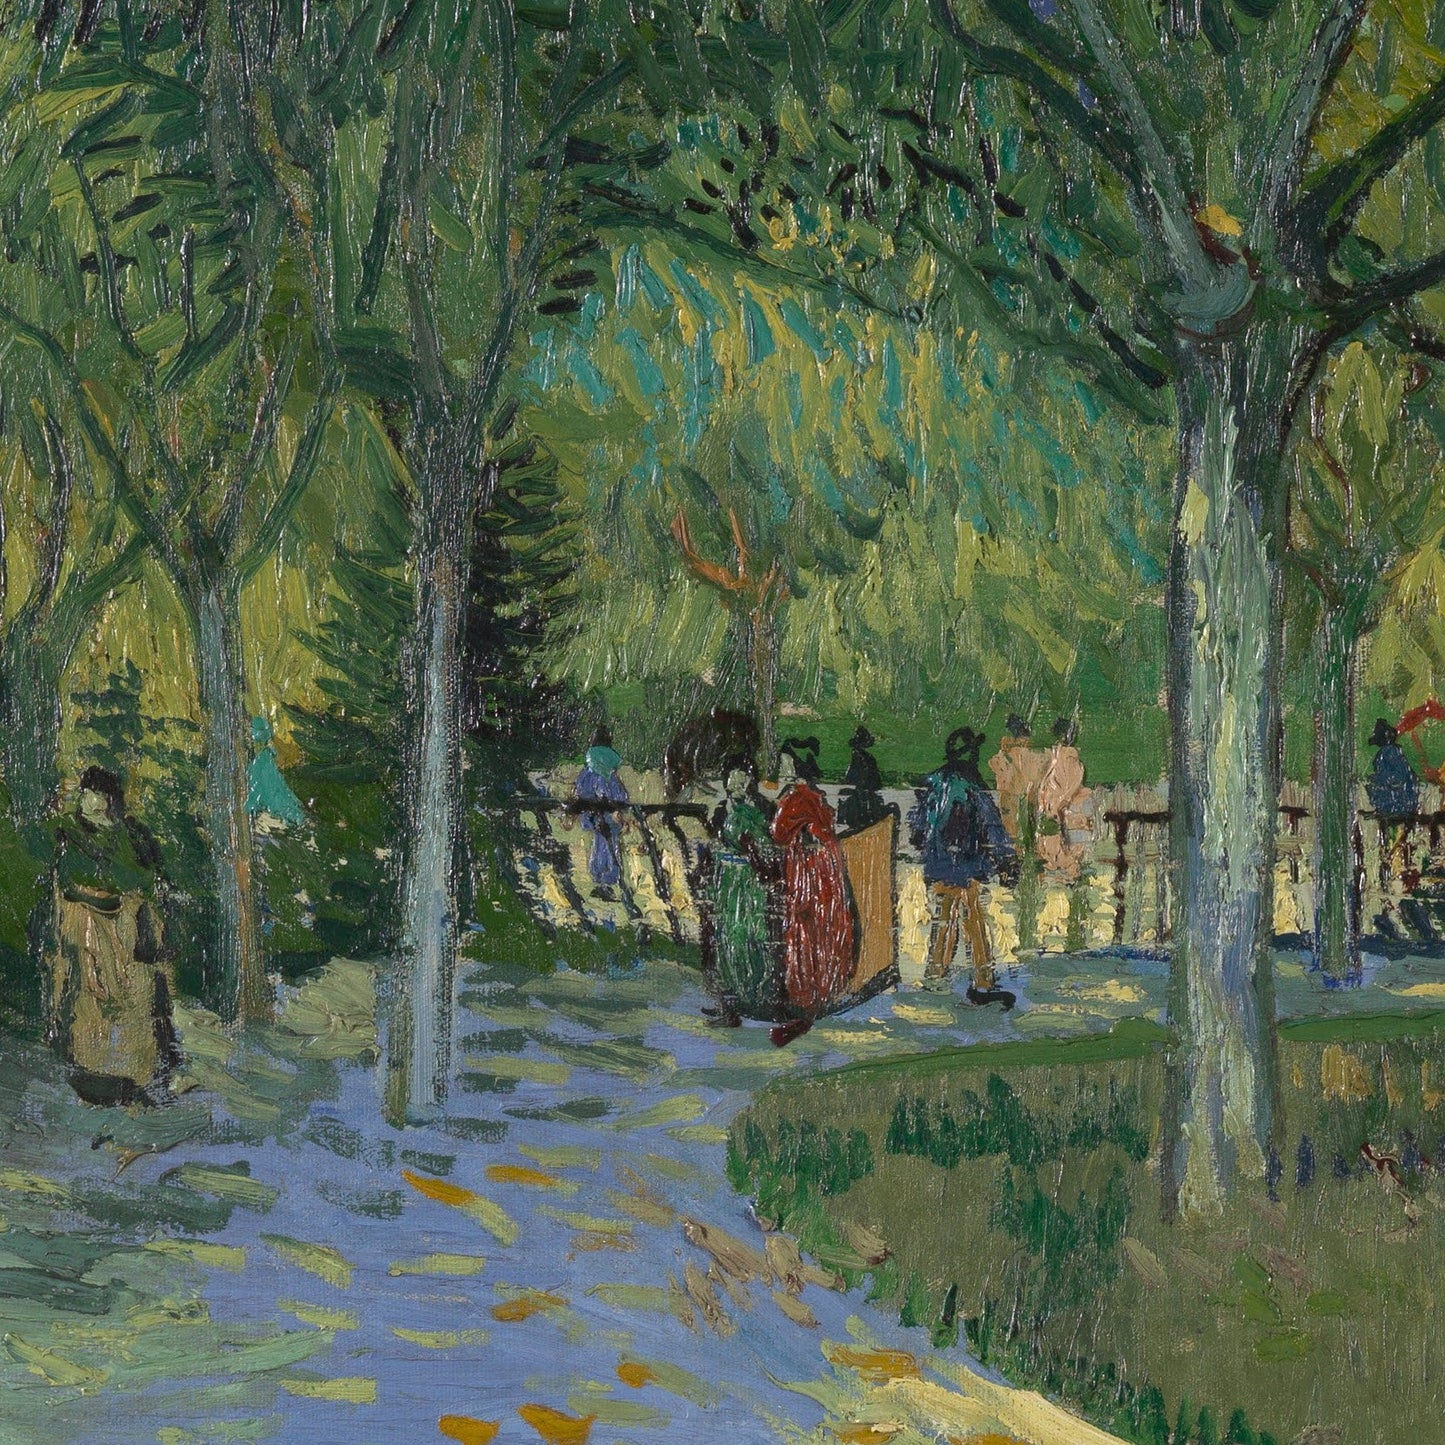 Path in the Park by Vincent Van Gogh, 3d Printed with texture and brush strokes looks like original oil-painting, code:409